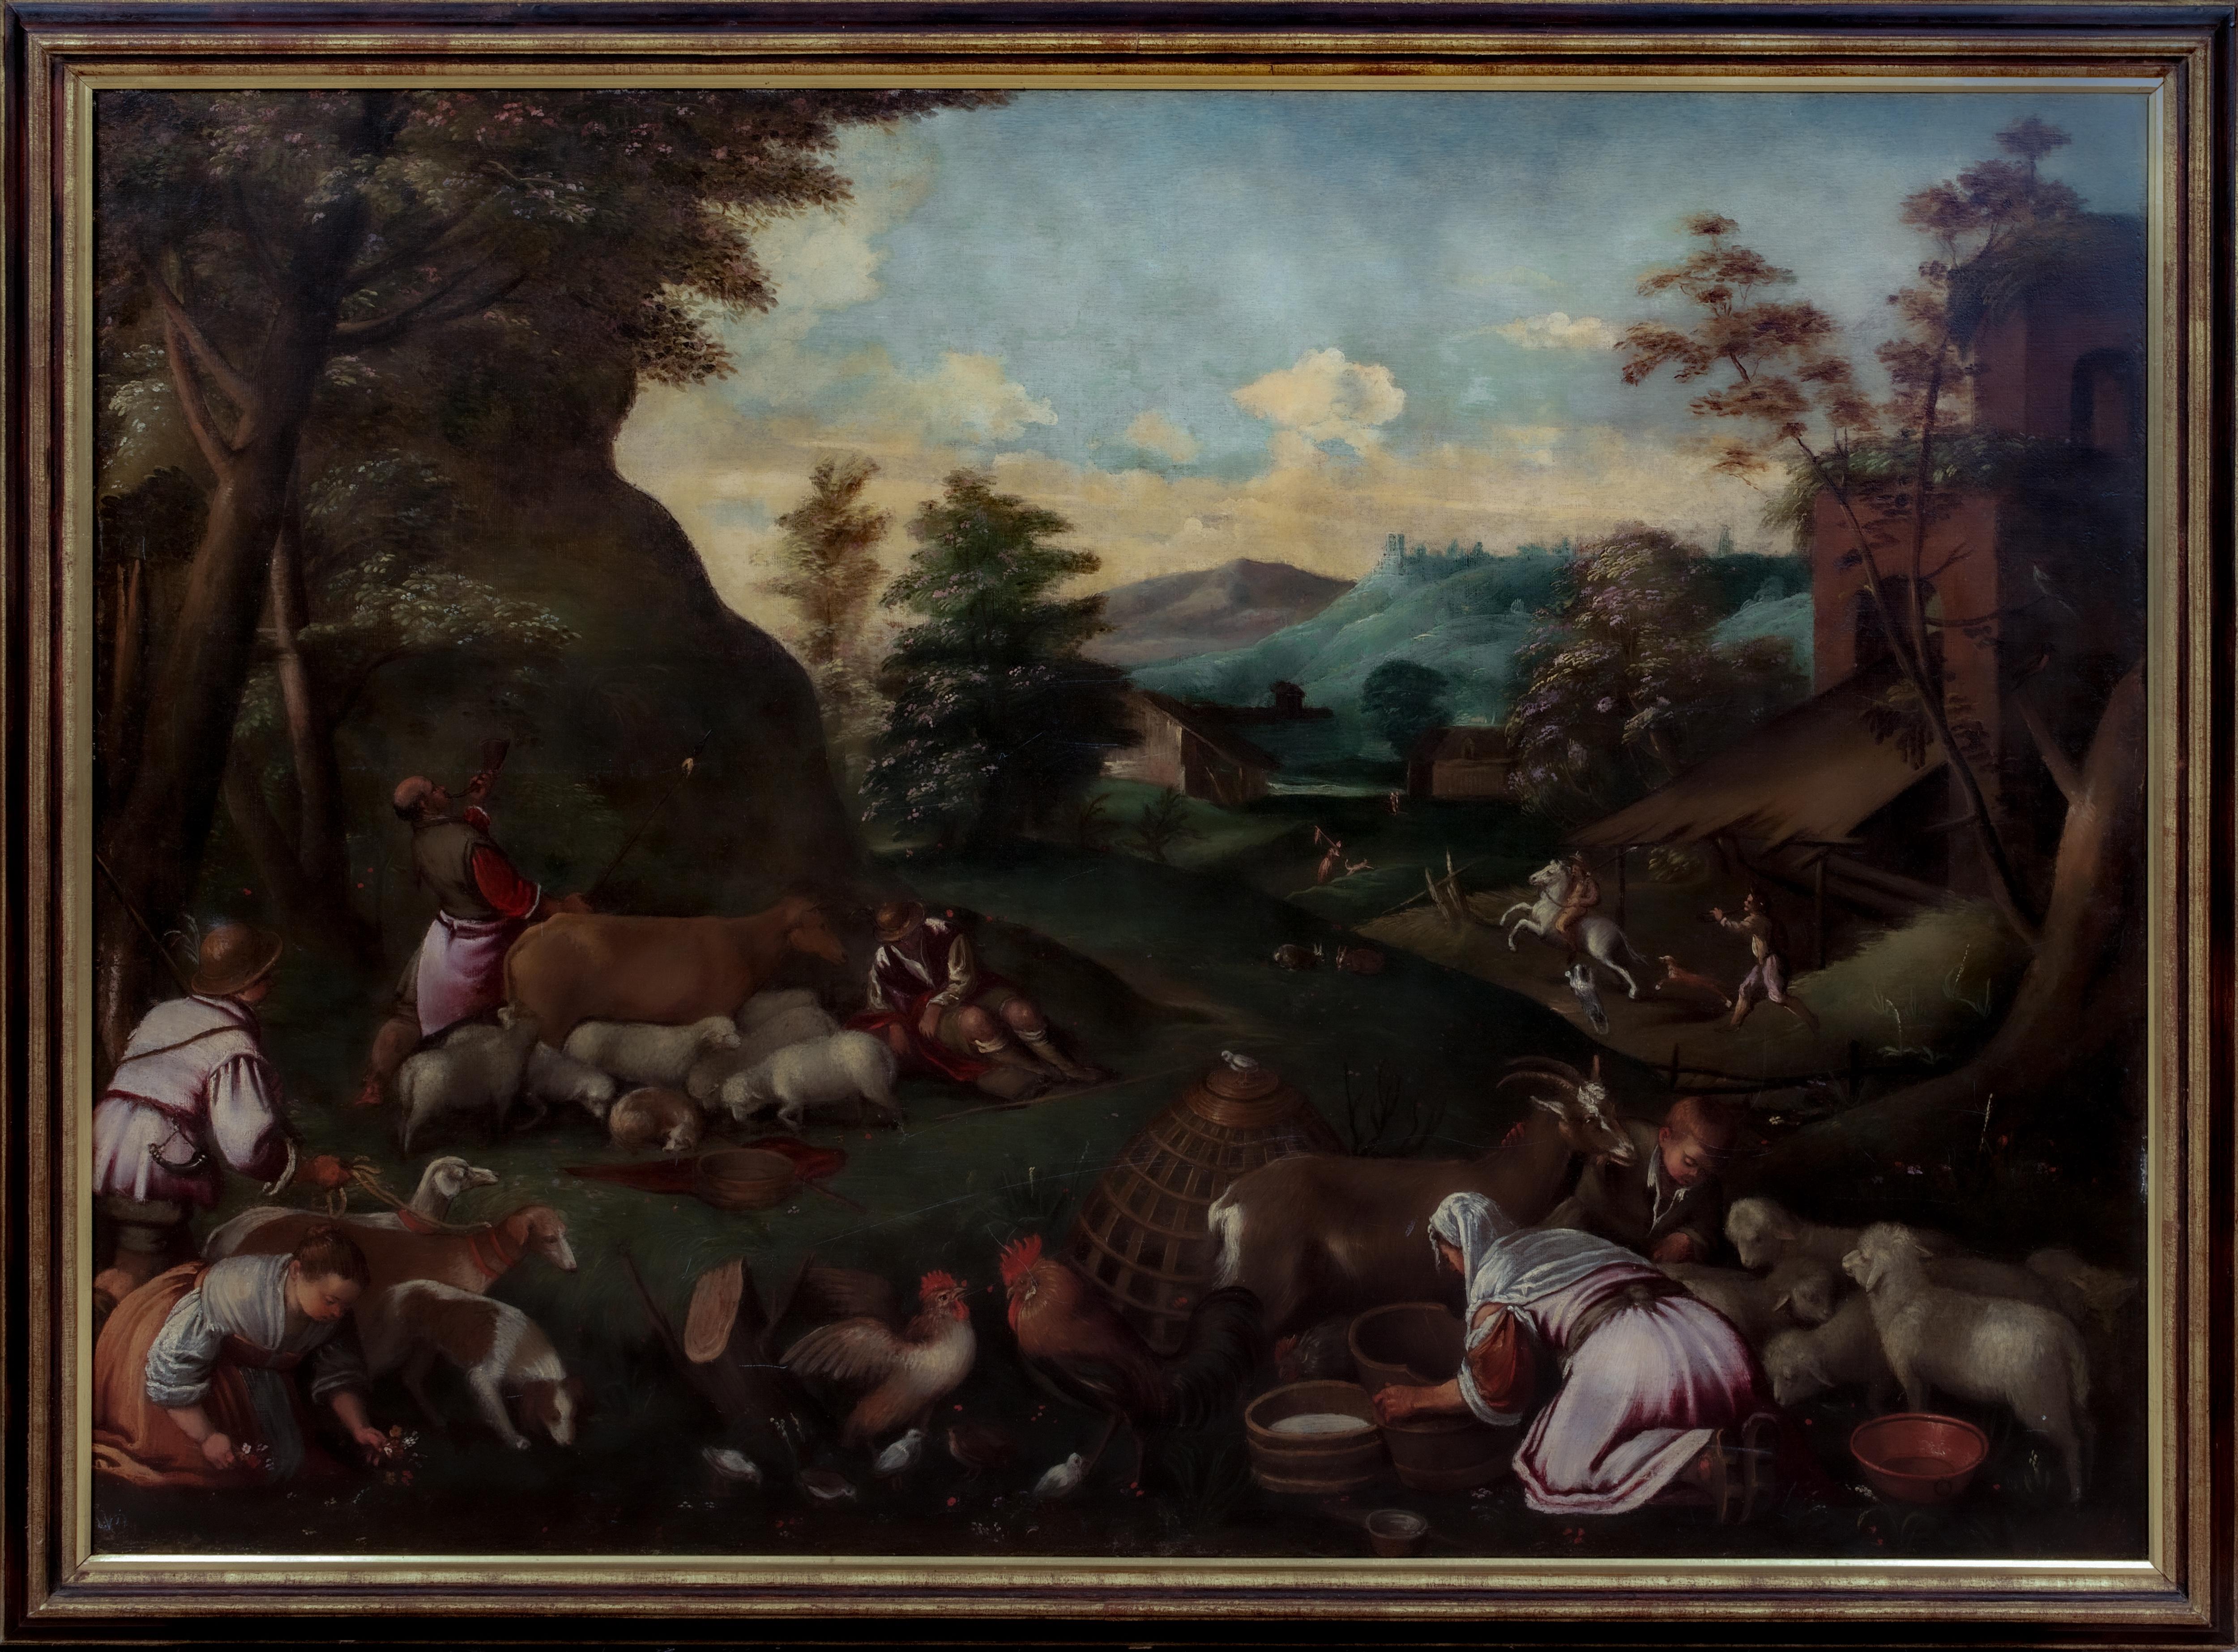 An Allegory of Spring, 16th Century 

Workshop Of Jacopo Bassano (1510-1592)

Huge 16th Century Italian Old Master Allegory of Spring, oil on canvas. Excellent quality and condition large scale of figures and animal during the arrival of spring,